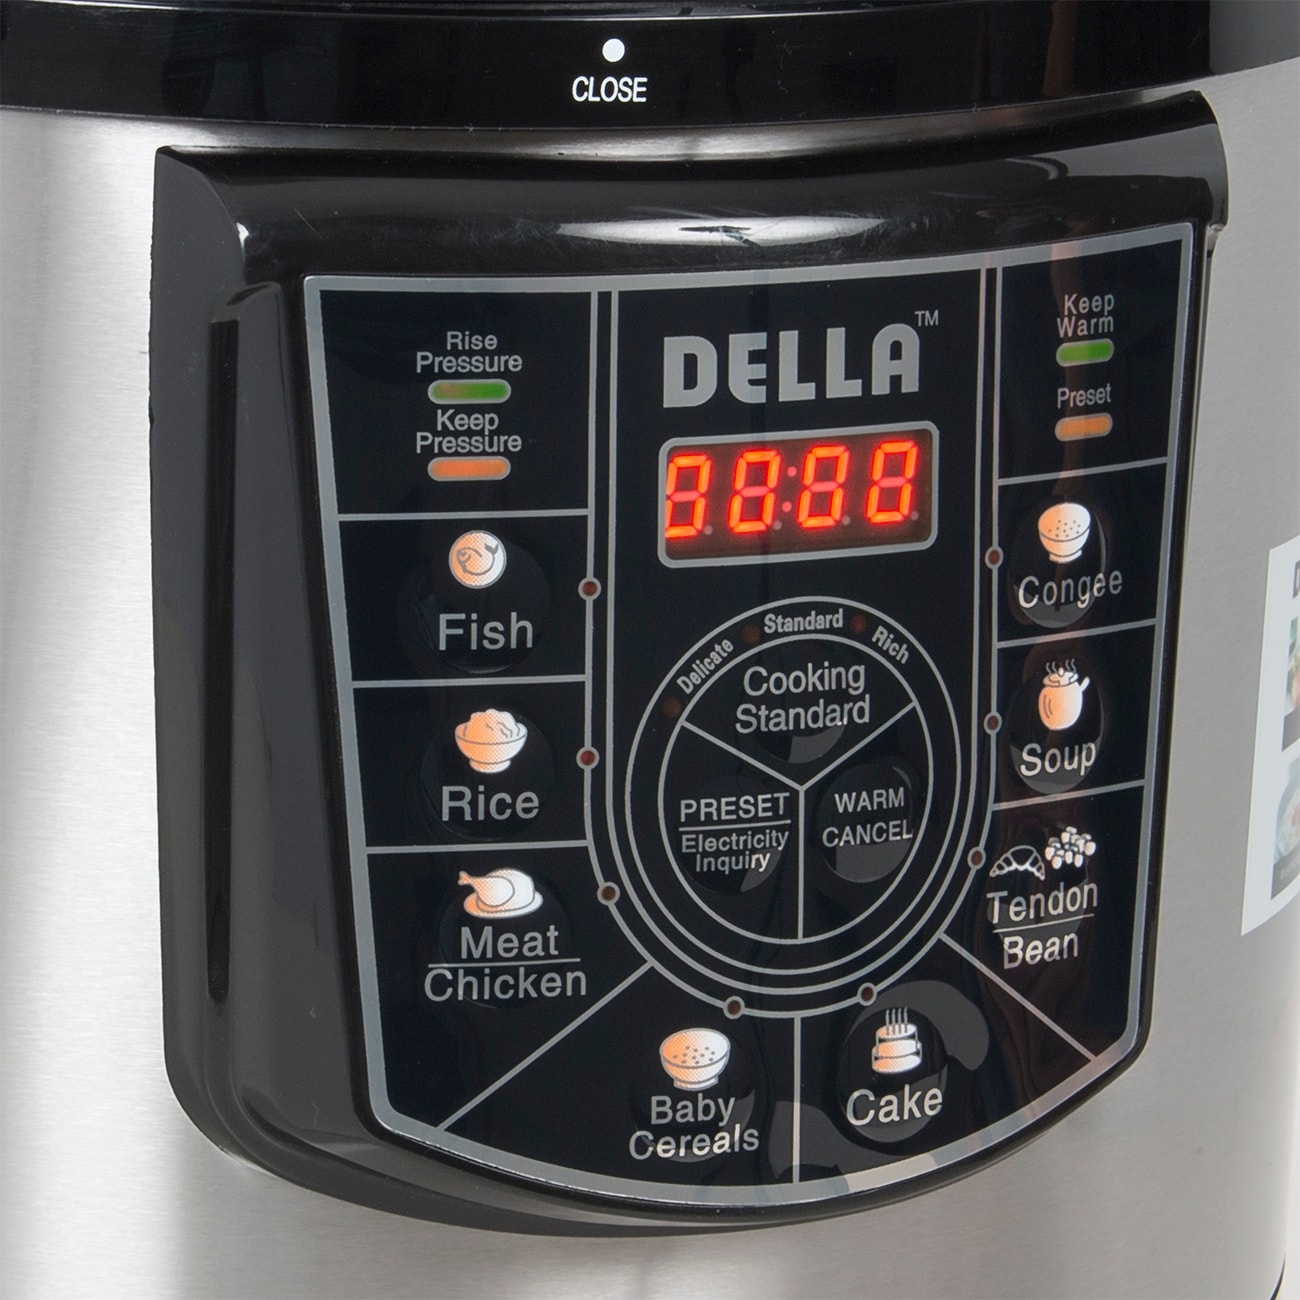 https://ak1.ostkcdn.com/images/products/is/images/direct/ea7ed644919c808eb7535da659583c6f25bffe64/Della-8-in-1-Programmable-Electric-Pressure-Cooker-Stainless-Steel%2C-10-Quart-1400-Watt.jpg